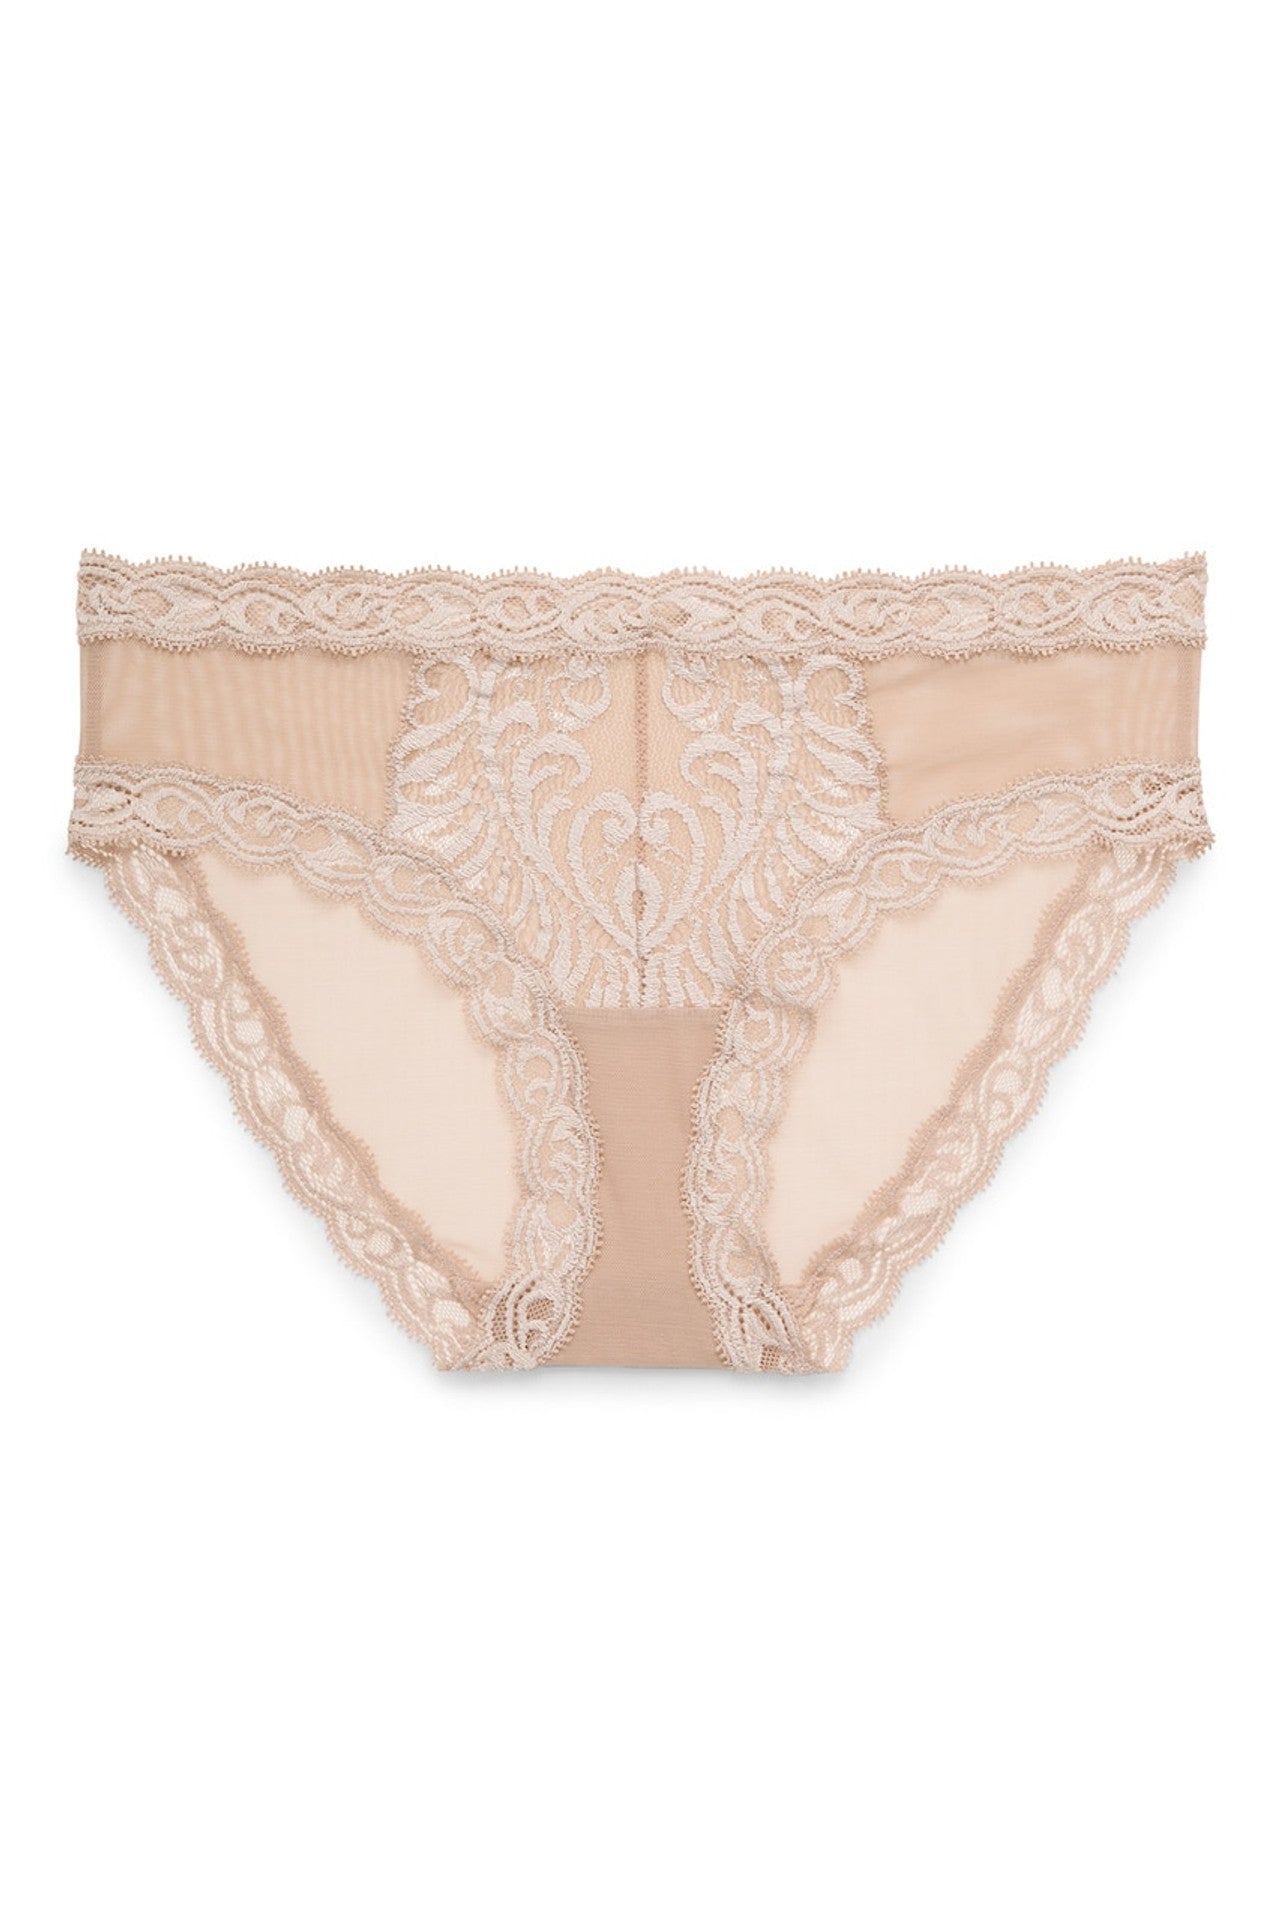 Stretchy lace low rise Hipster panty